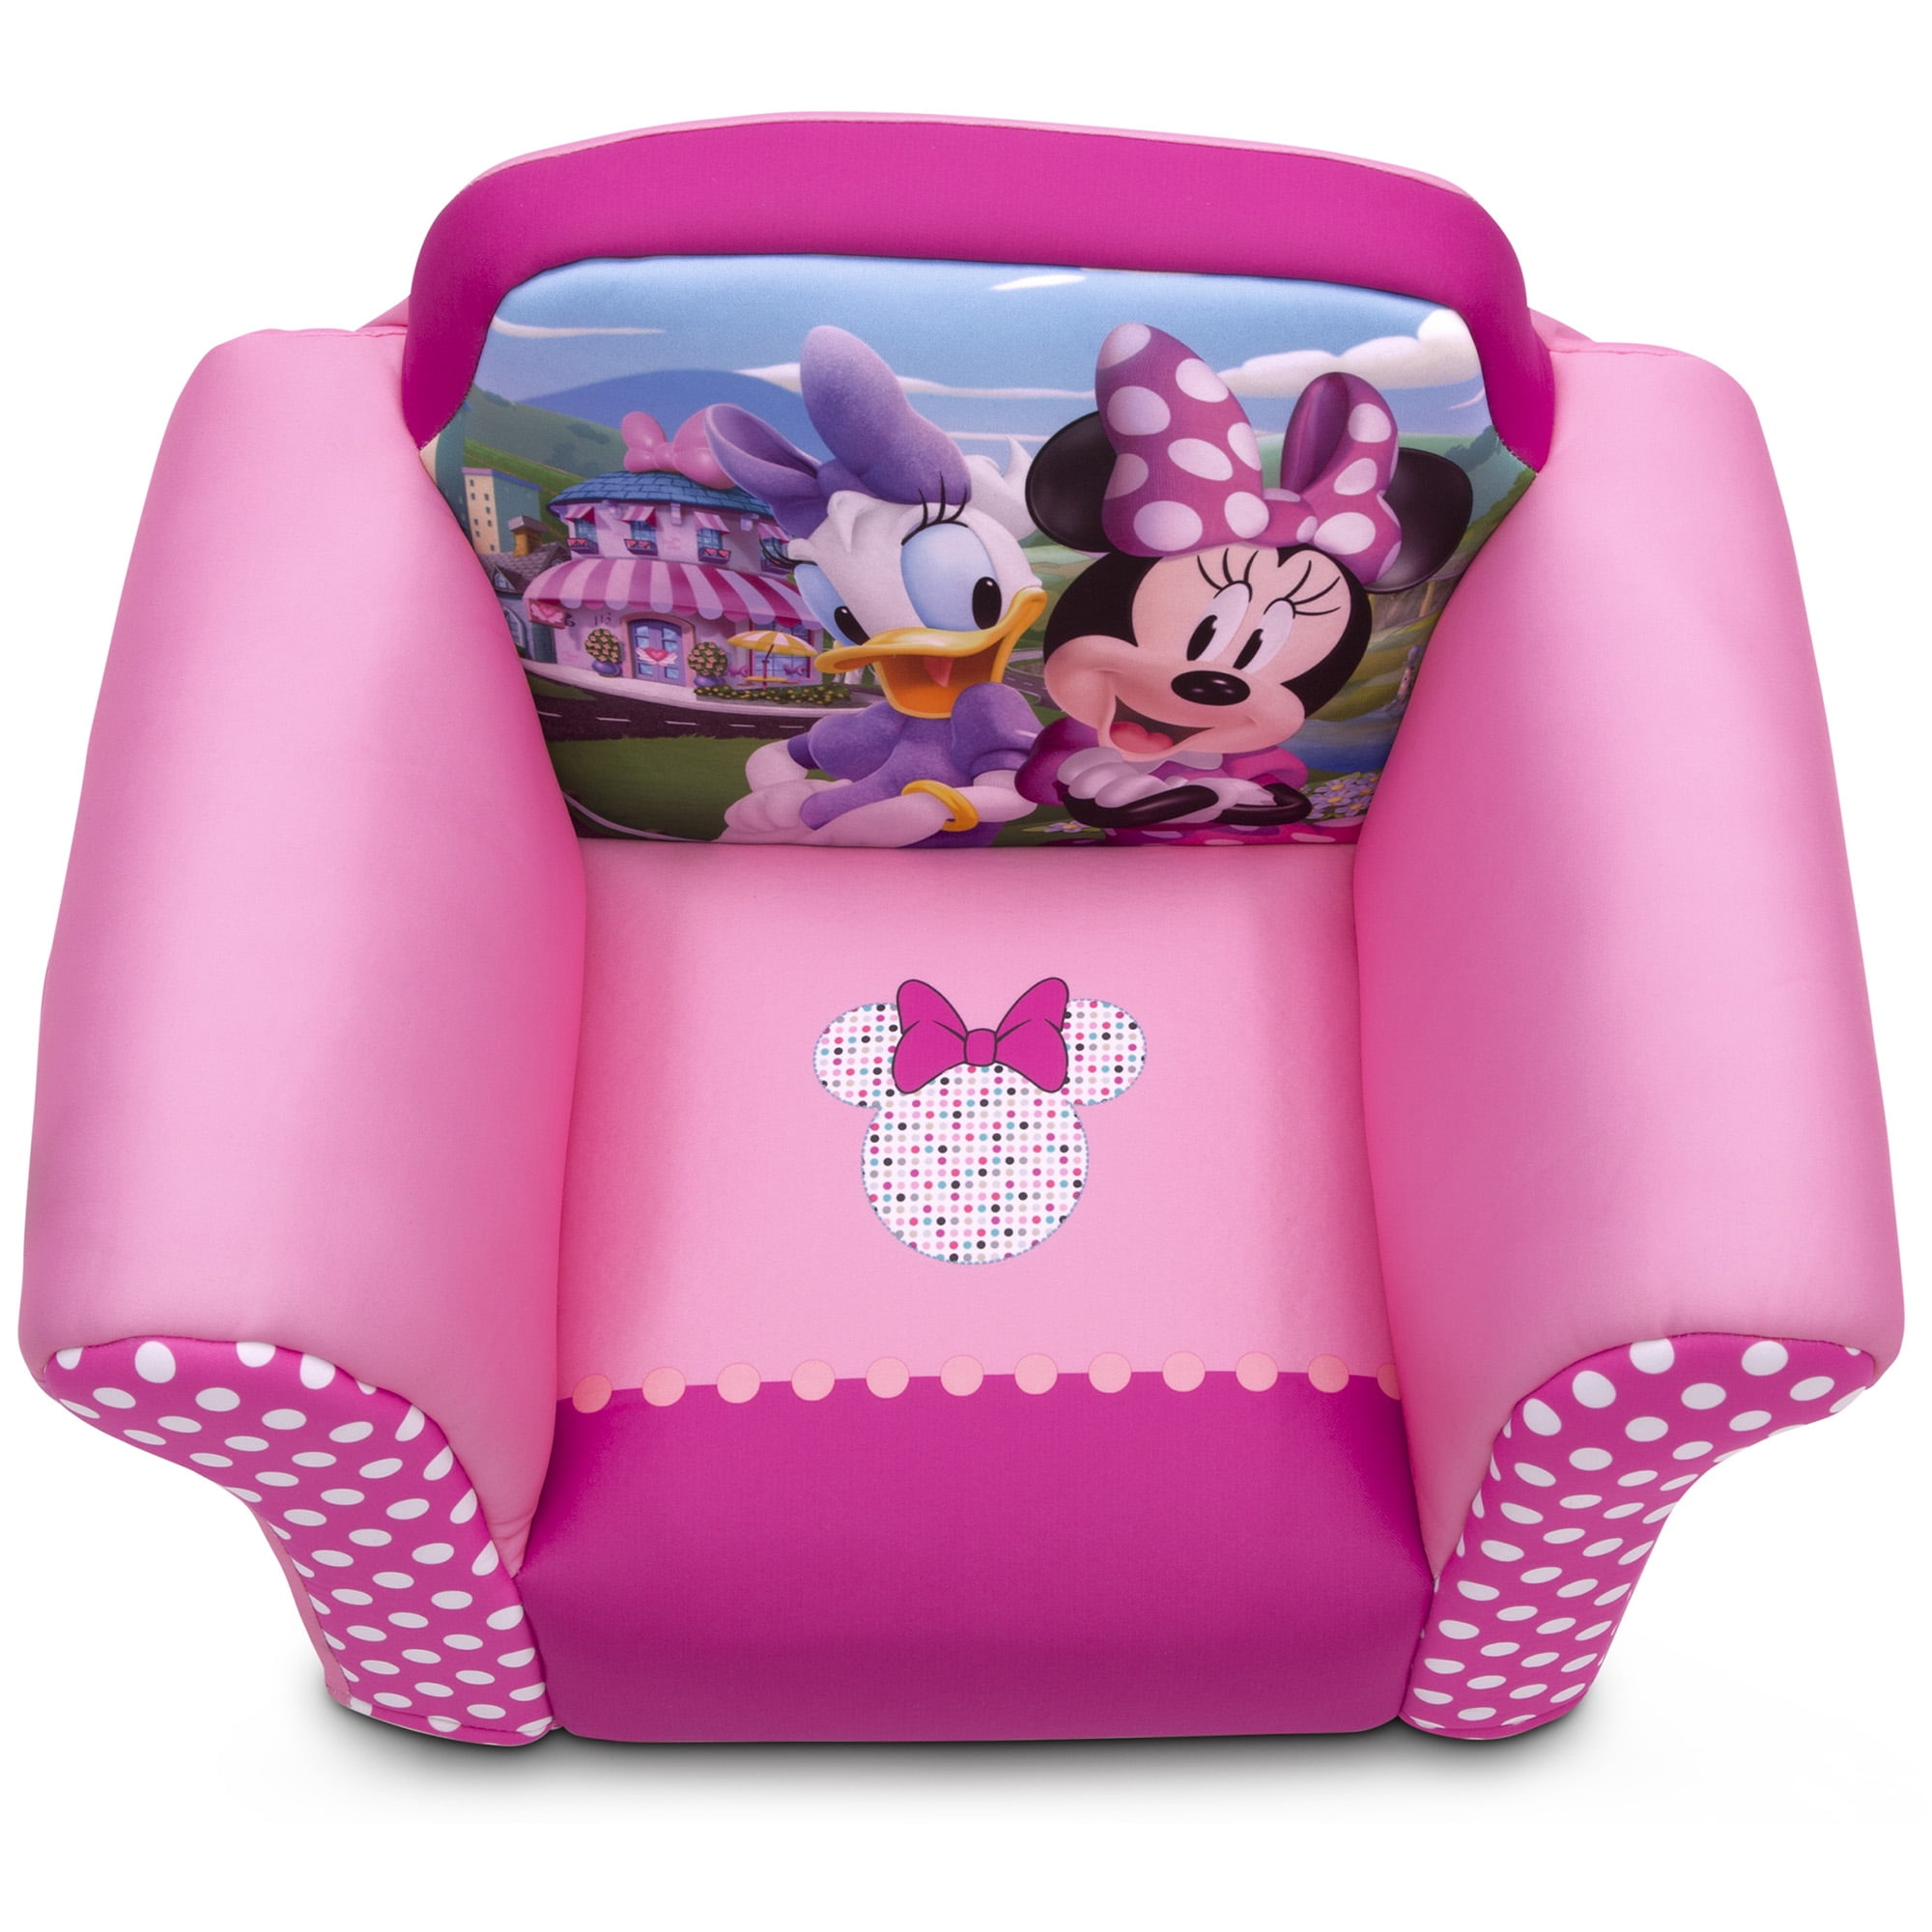 Minnie Mouse Upholstered Chair - Delta Children